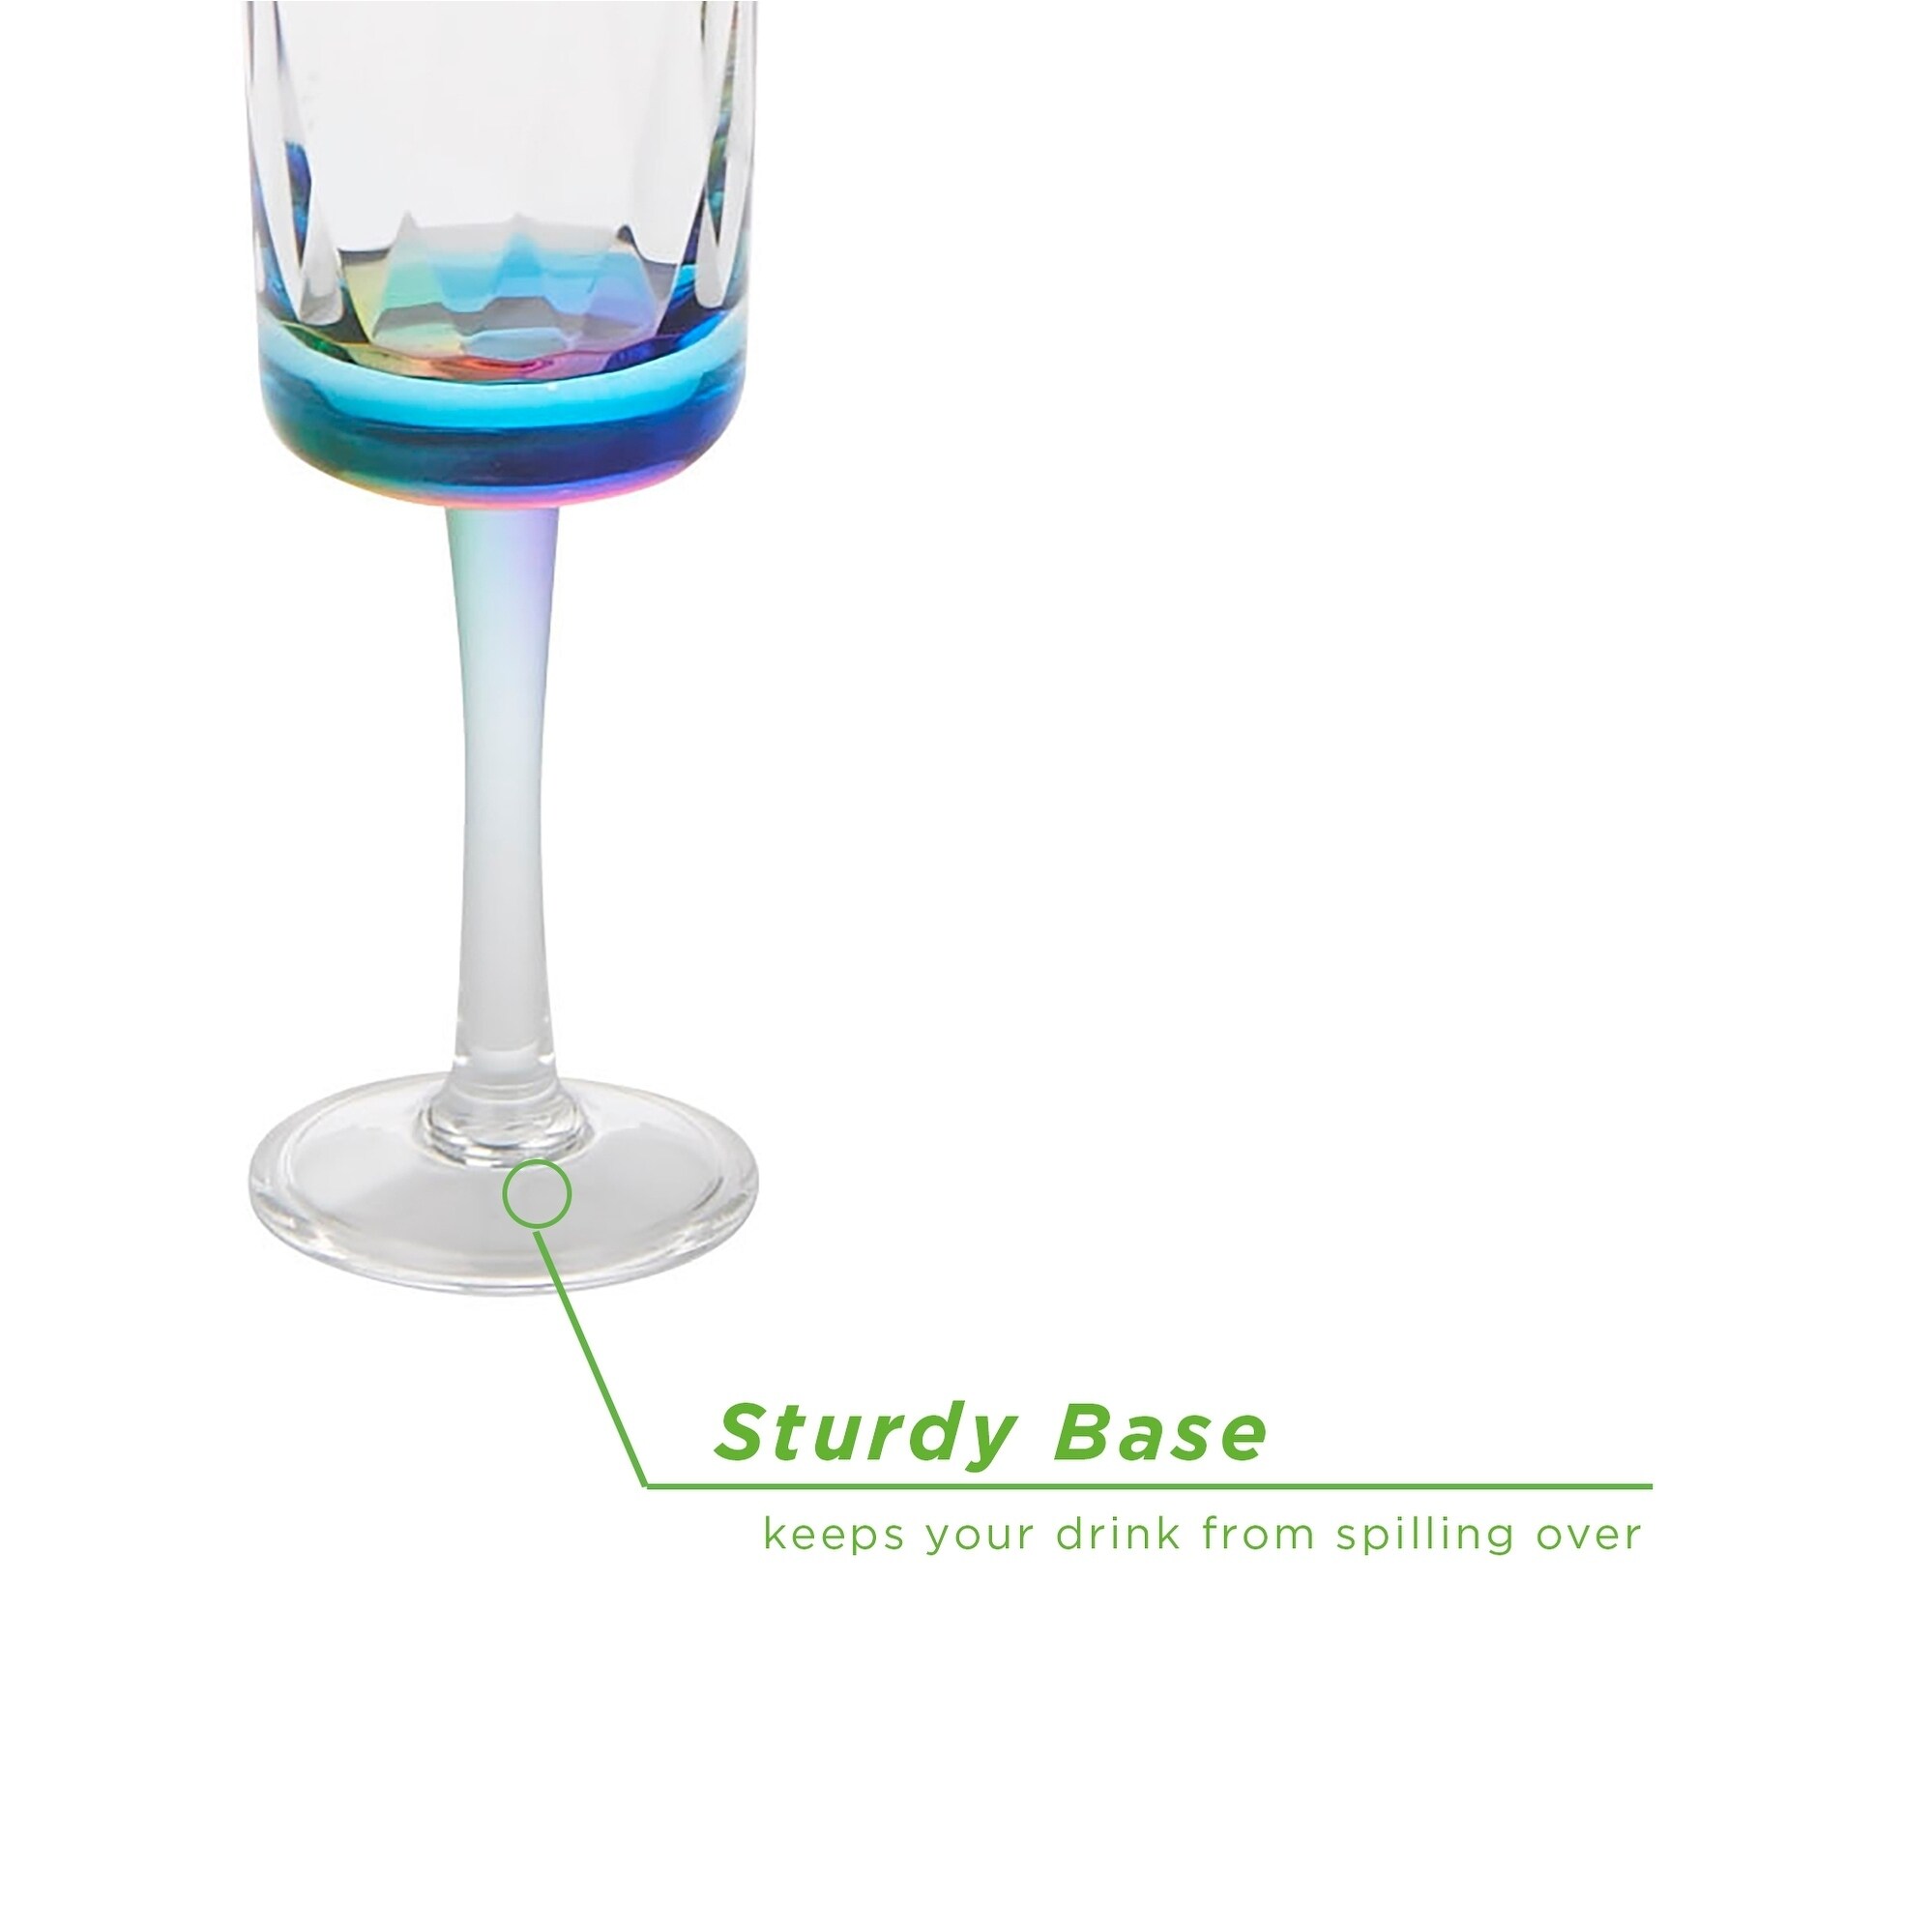 https://ak1.ostkcdn.com/images/products/27995042/Mind-Reader-6-Pack-6-Oz-Rainbow-Champagne-Flute-Acrylic-Drinking-Glass-Shatter-Resistant-Clear-a753d778-825e-470a-9f8d-5eeffcfcf526.jpg